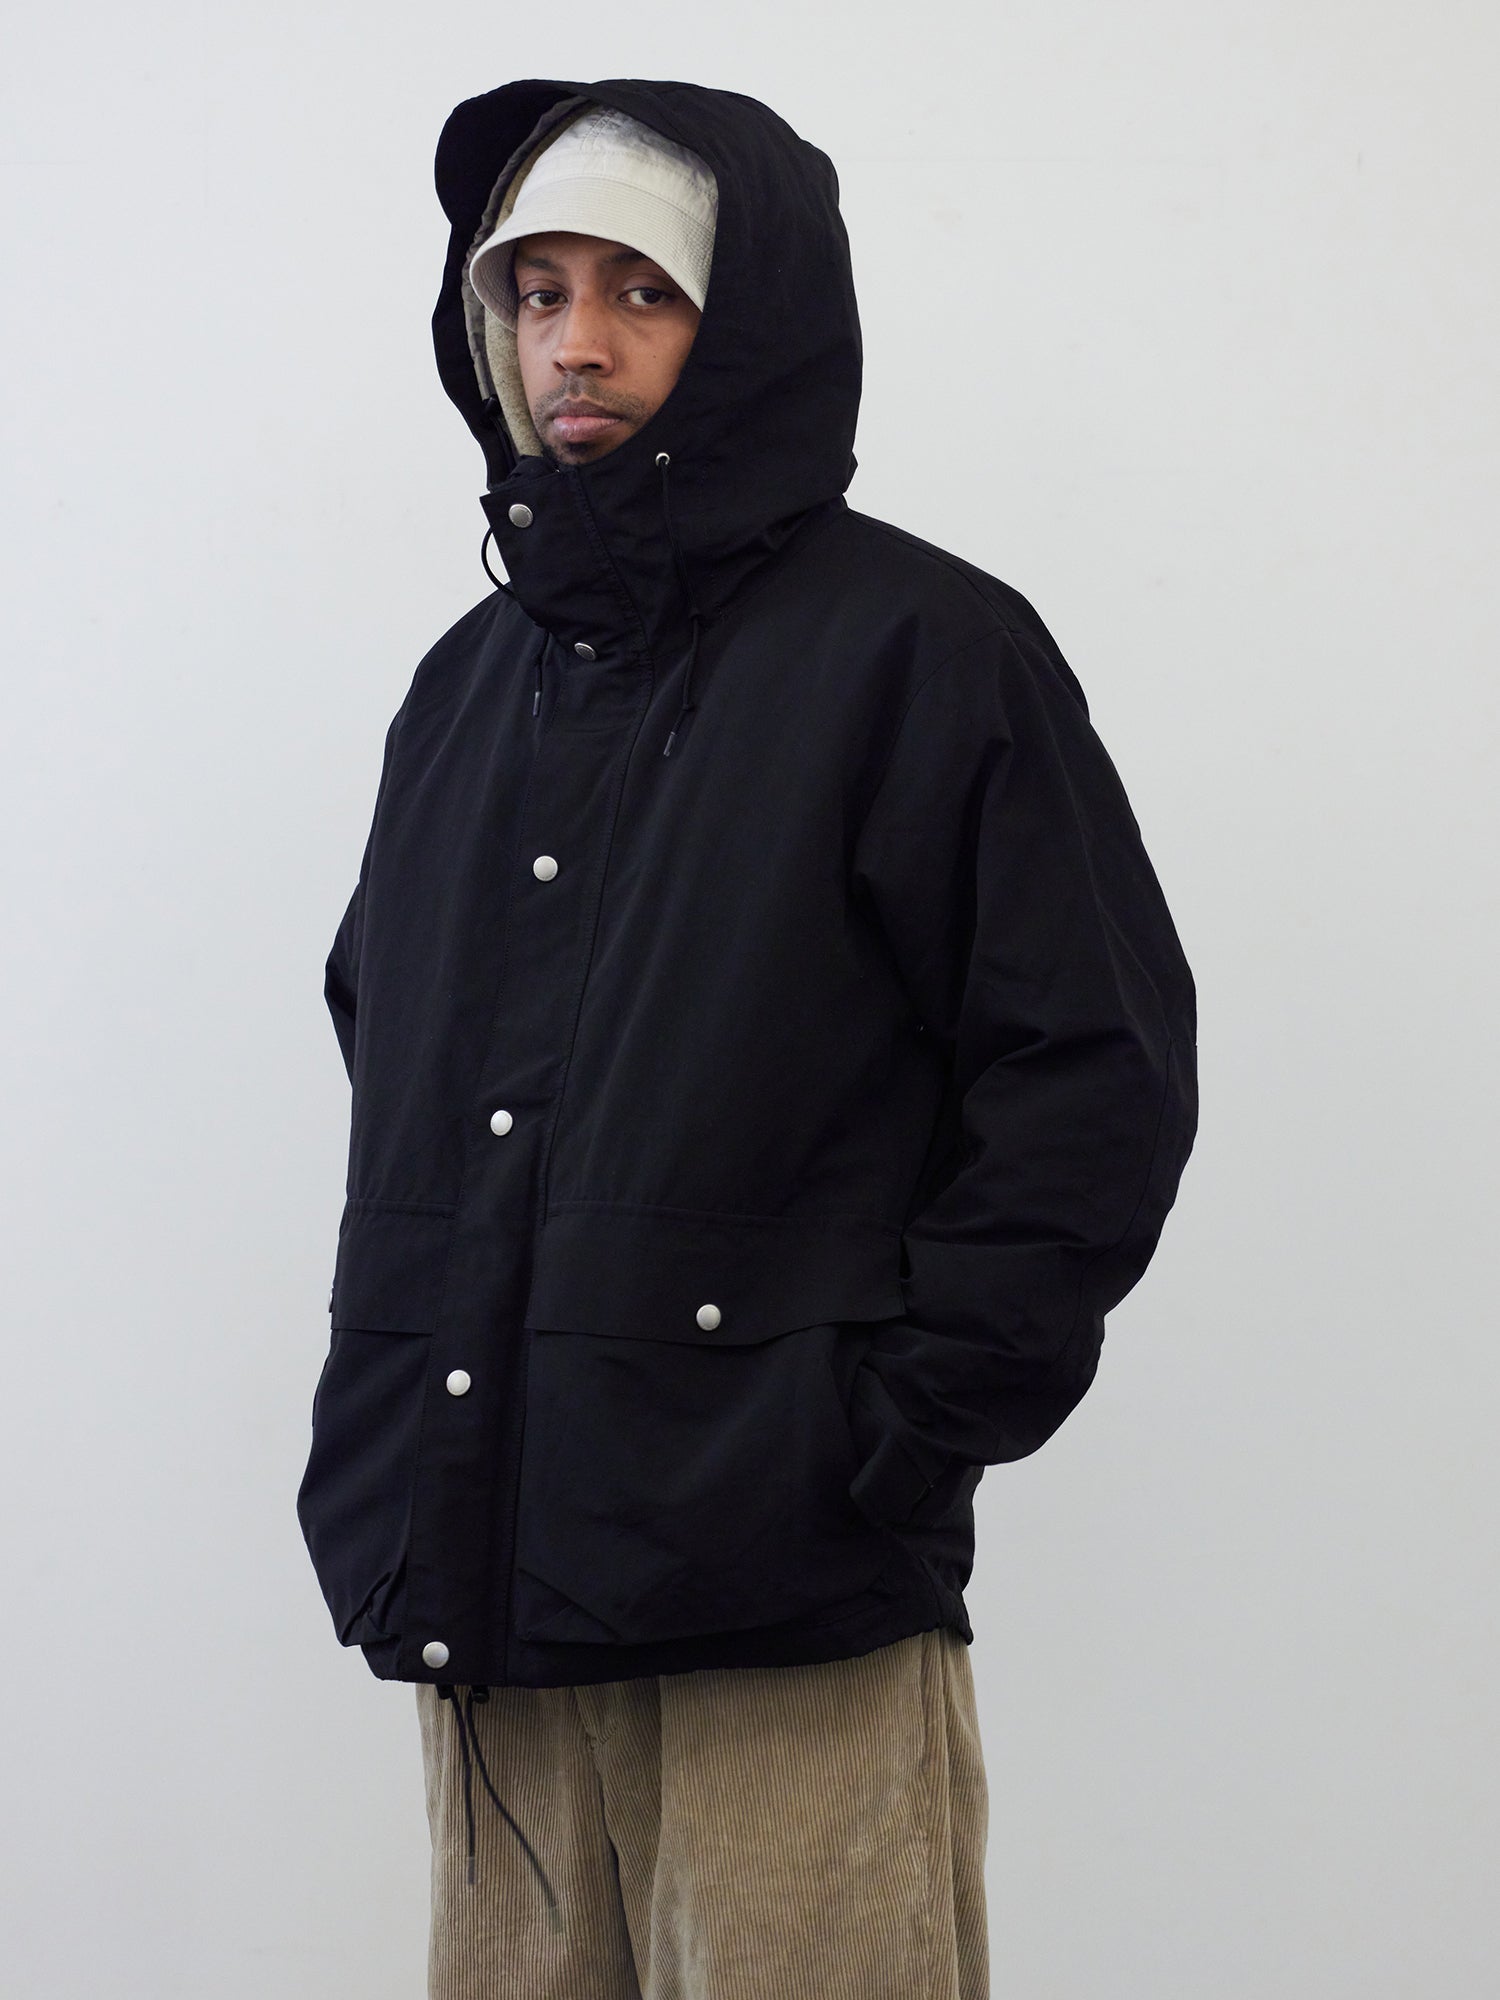 ENDS and MEANS Sanpo Jacket Black – CUXTON HOUSE